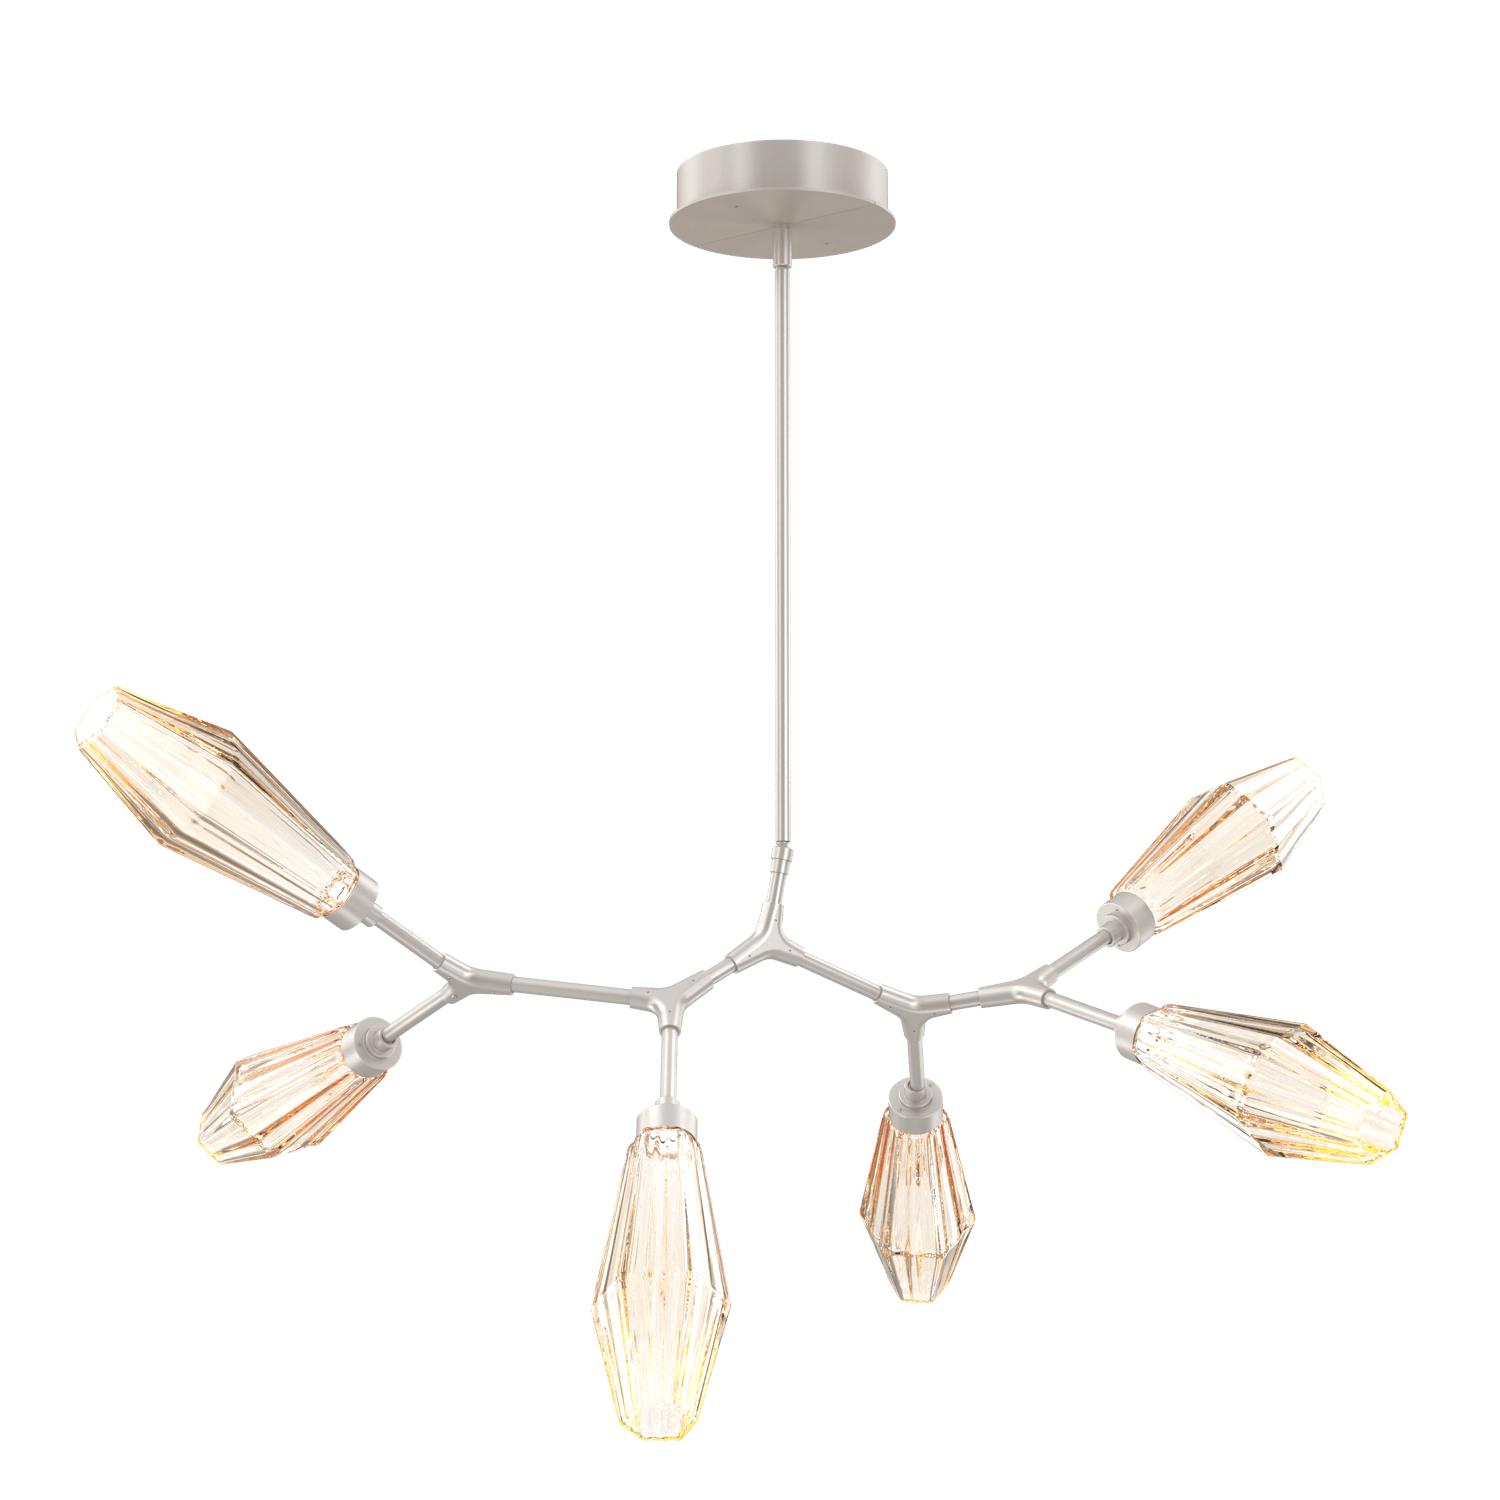 PLB0049-BA-BS-RA-Hammerton-Studio-Aalto-6-light-modern-branch-chandelier-with-metallic-beige-silver-finish-and-optic-ribbed-amber-glass-shades-and-LED-lamping